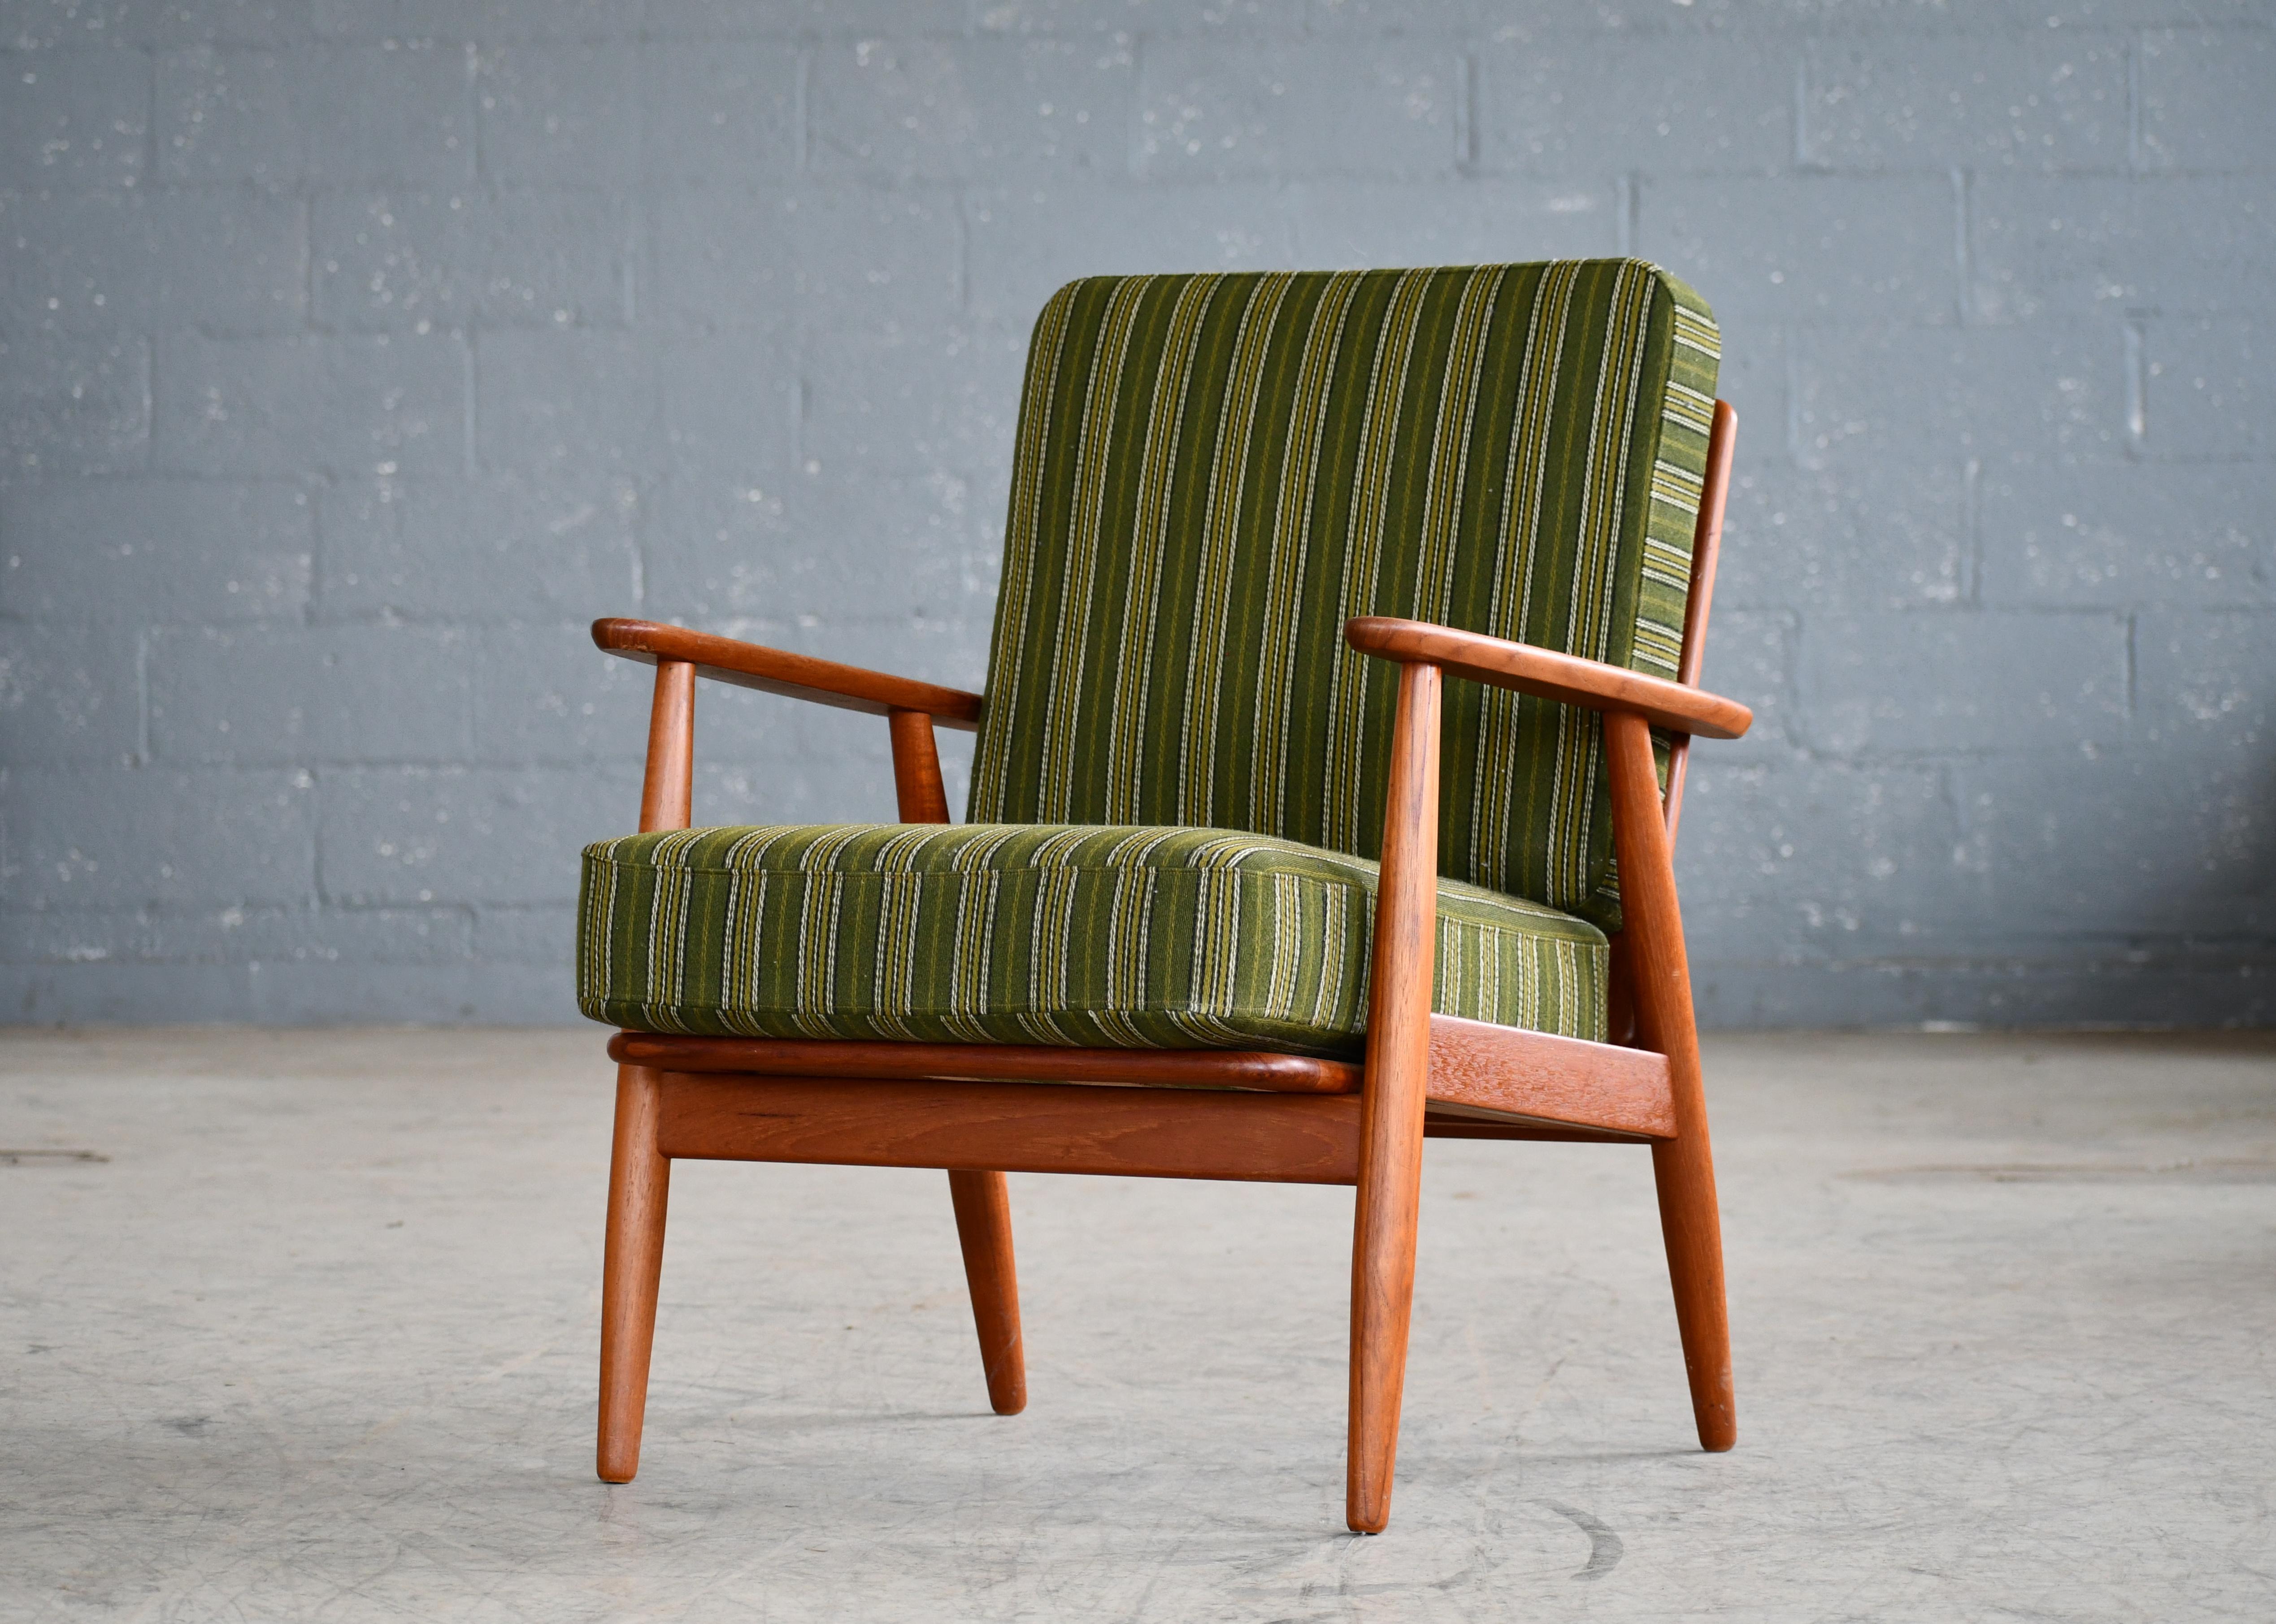 Very charming classic Danish easy chairs from the 1950s in the style of Arne Vodder and Hans Wegner's Cigar chair. Solid teak base with armrests in solid teak and a very nice wood grain and with the original spring loaded cushions. Fabric showing